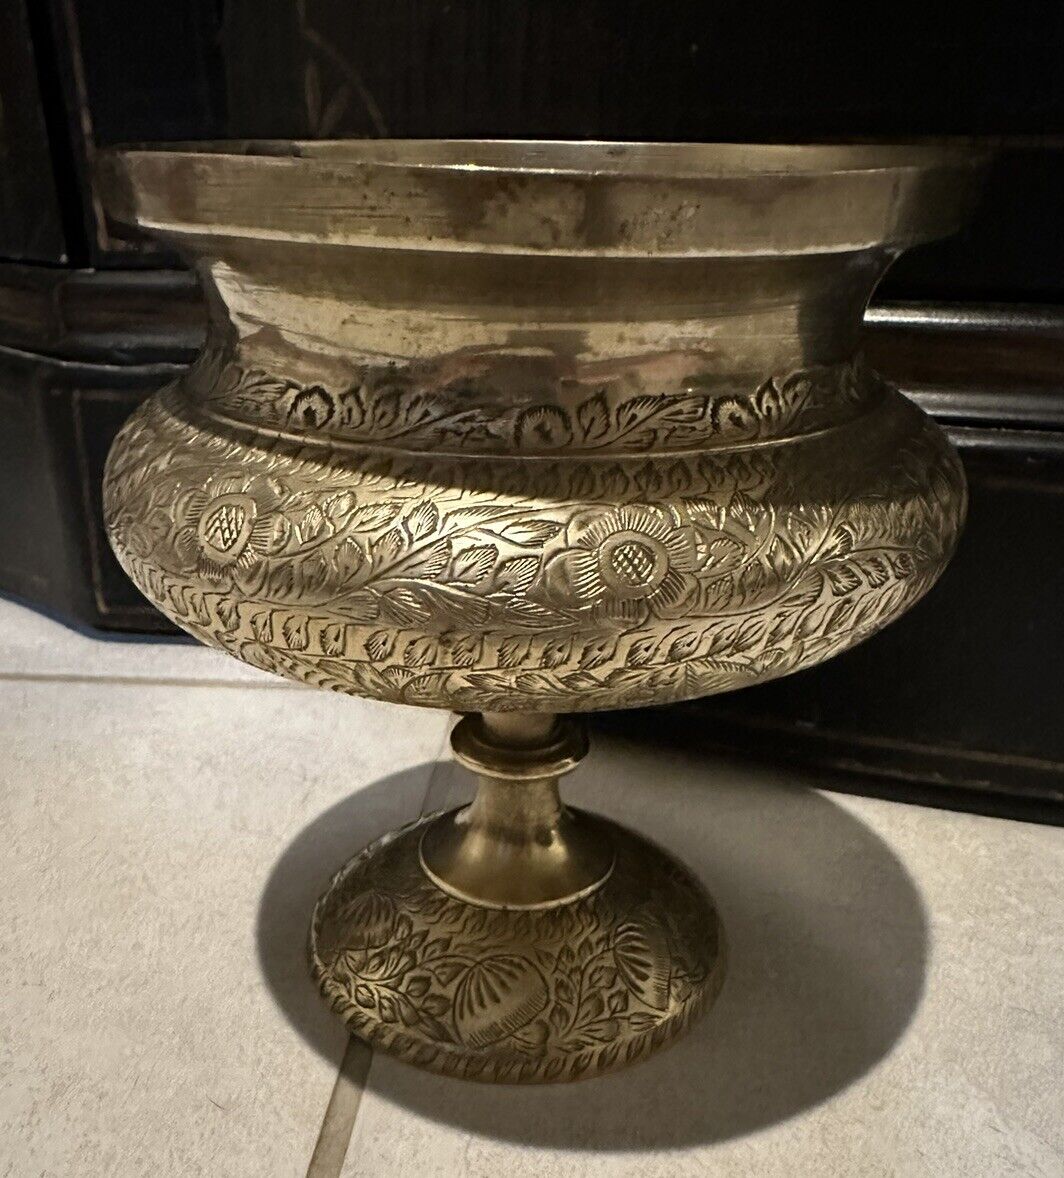 Intricately Carved Brass Urn 6.25” High From India